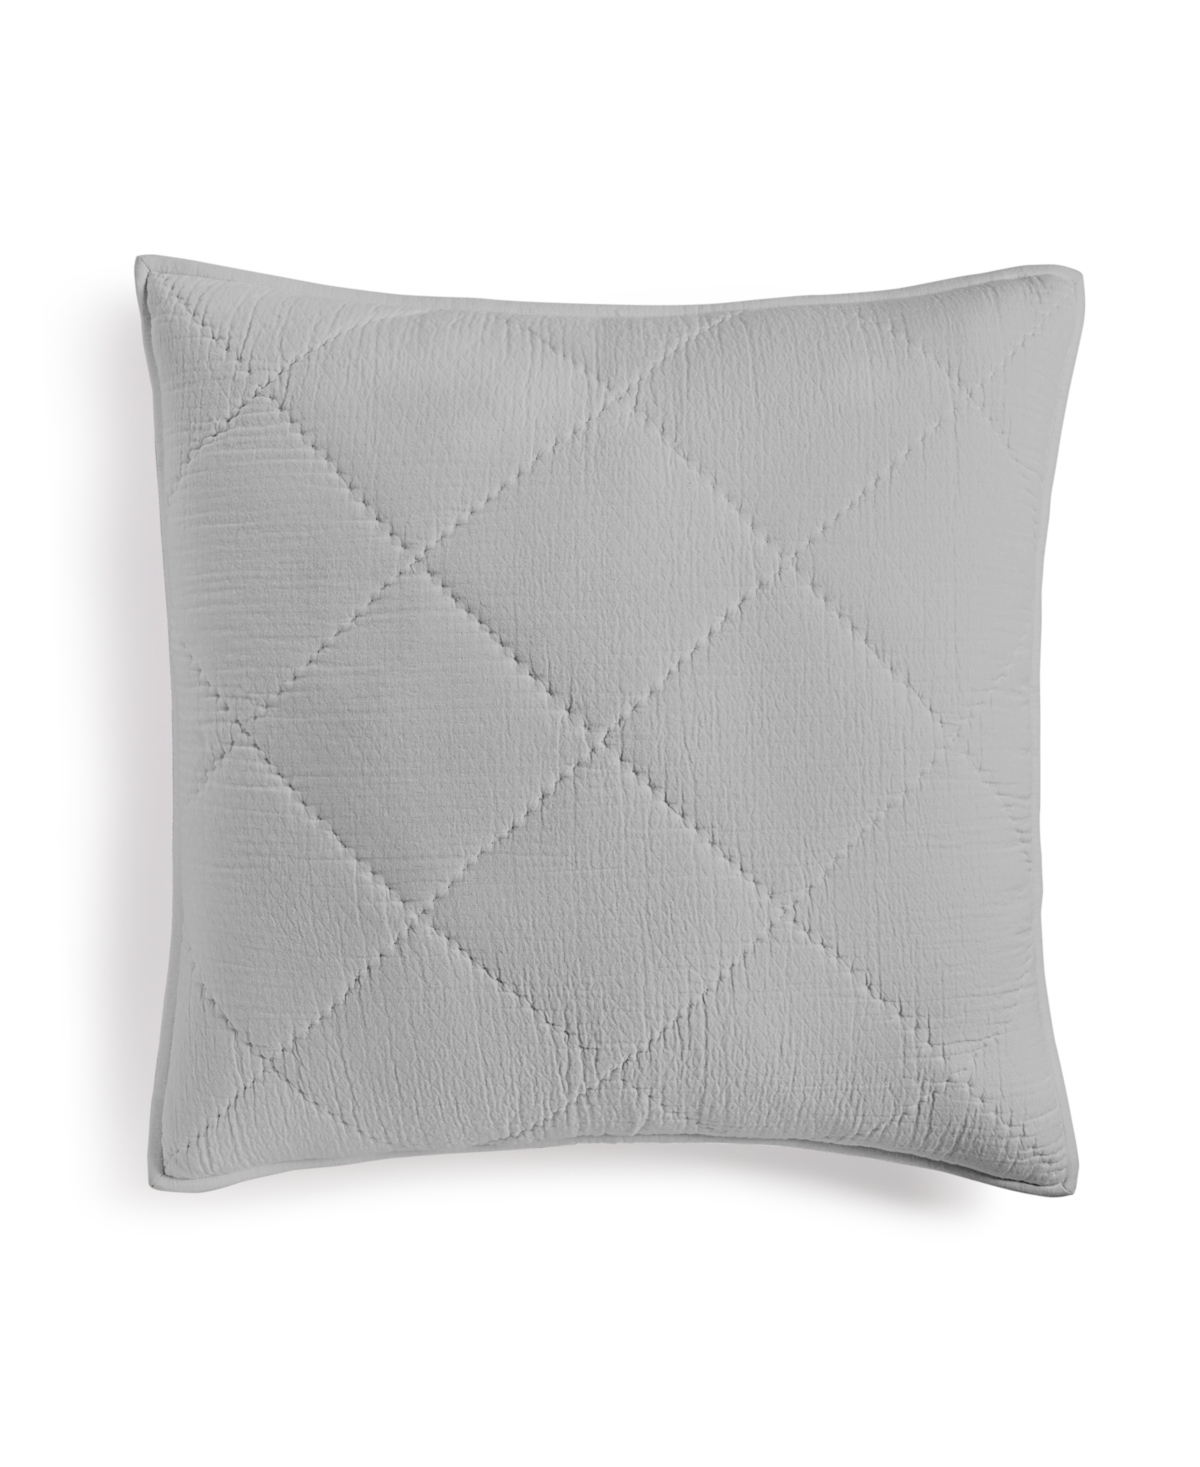 Closeout! Hotel Collection Dobby Diamond Quilted Sham, European, Created for Macy's - Grey